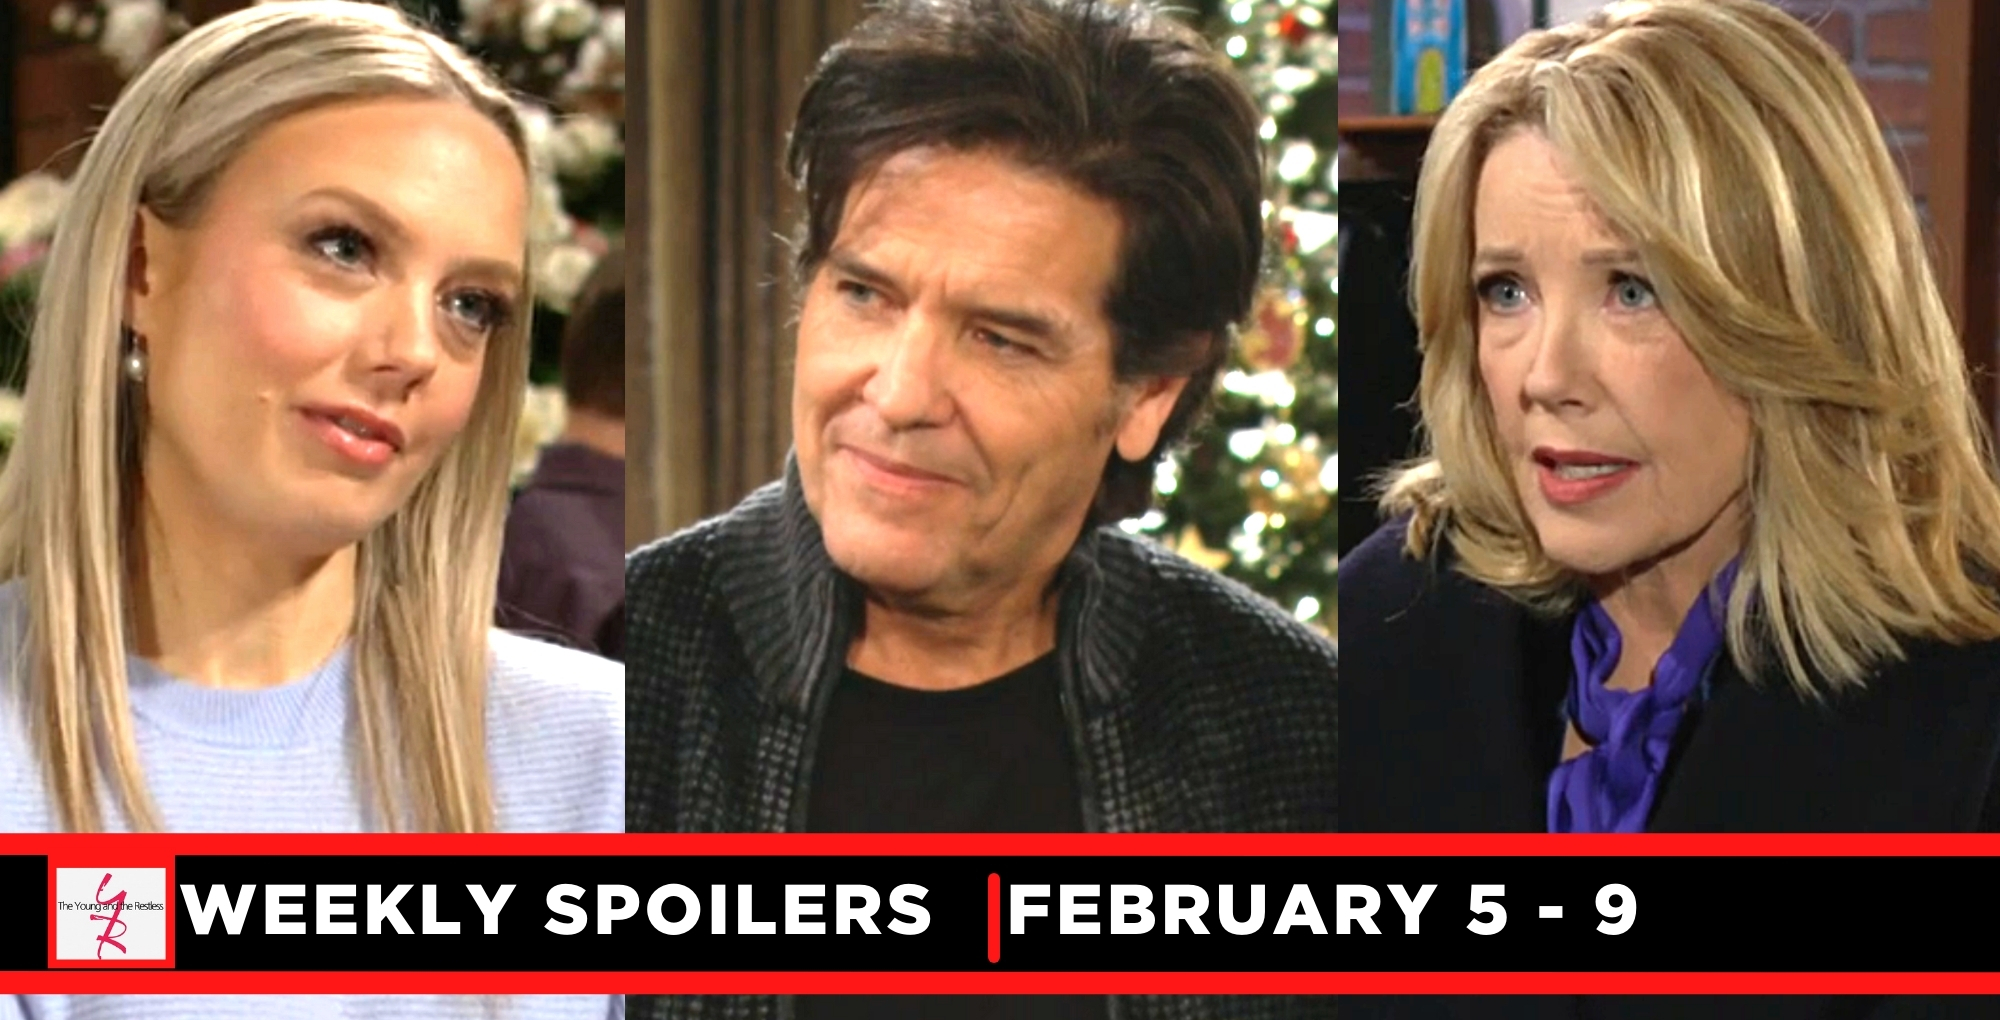 young and the restless spoilers for the week of february 5 - february 9, abby, danny, nikki